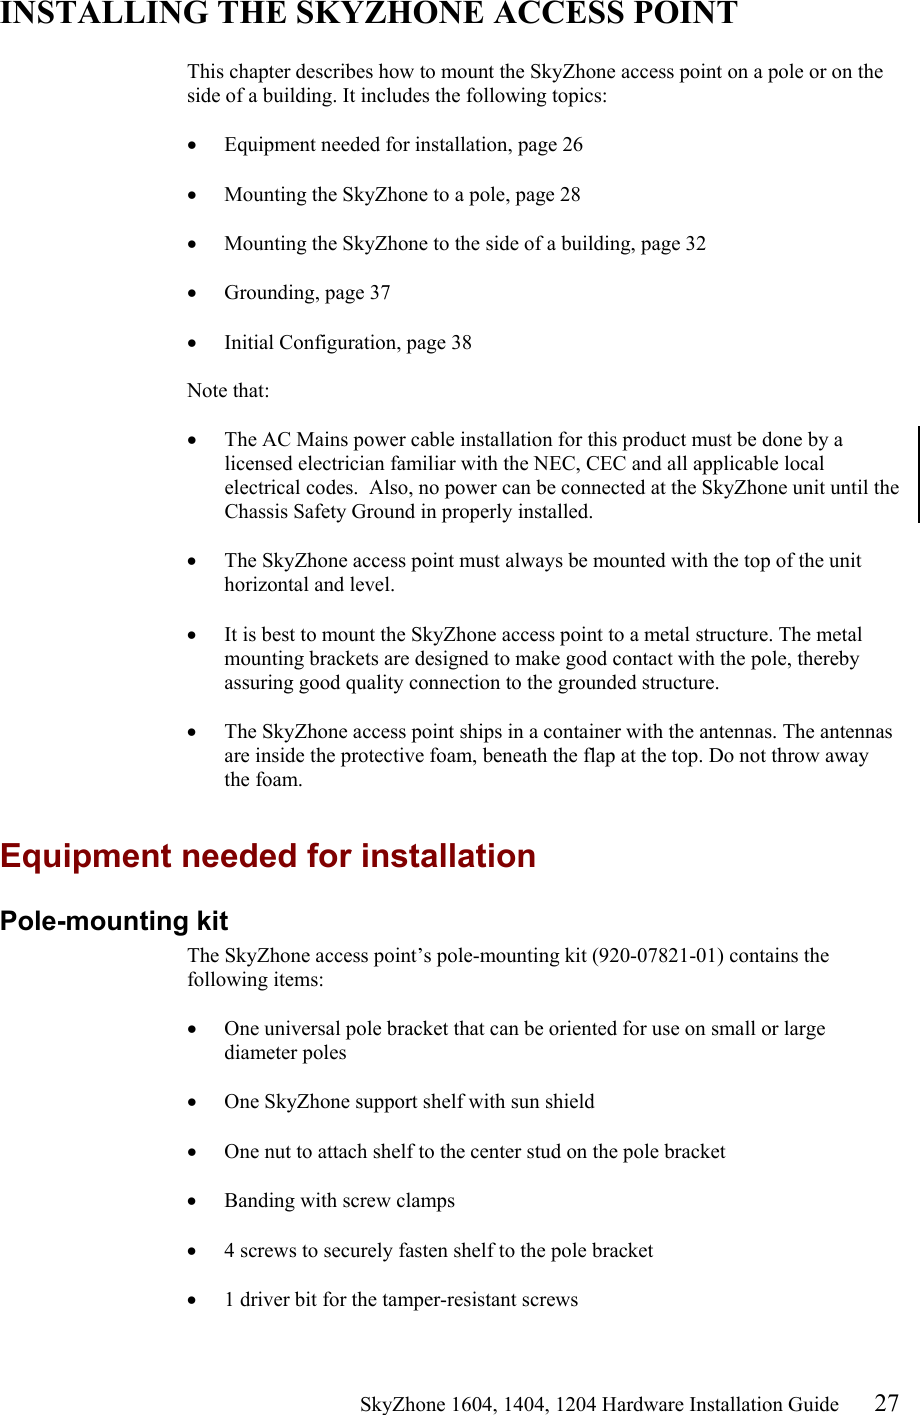                                                   SkyZhone 1604, 1404, 1204 Hardware Installation Guide 27 INSTALLING THE SKYZHONE ACCESS POINT  This chapter describes how to mount the SkyZhone access point on a pole or on the side of a building. It includes the following topics:  •  Equipment needed for installation, page 26  •  Mounting the SkyZhone to a pole, page 28  •  Mounting the SkyZhone to the side of a building, page 32  •  Grounding, page 37  •  Initial Configuration, page 38  Note that:   •  The AC Mains power cable installation for this product must be done by a licensed electrician familiar with the NEC, CEC and all applicable local electrical codes.  Also, no power can be connected at the SkyZhone unit until the Chassis Safety Ground in properly installed.  •  The SkyZhone access point must always be mounted with the top of the unit horizontal and level.  •  It is best to mount the SkyZhone access point to a metal structure. The metal mounting brackets are designed to make good contact with the pole, thereby assuring good quality connection to the grounded structure.  •  The SkyZhone access point ships in a container with the antennas. The antennas are inside the protective foam, beneath the flap at the top. Do not throw away the foam.  Equipment needed for installation Pole-mounting kit The SkyZhone access point’s pole-mounting kit (920-07821-01) contains the following items:  •  One universal pole bracket that can be oriented for use on small or large diameter poles  •  One SkyZhone support shelf with sun shield  •  One nut to attach shelf to the center stud on the pole bracket  •  Banding with screw clamps  •  4 screws to securely fasten shelf to the pole bracket  •  1 driver bit for the tamper-resistant screws 